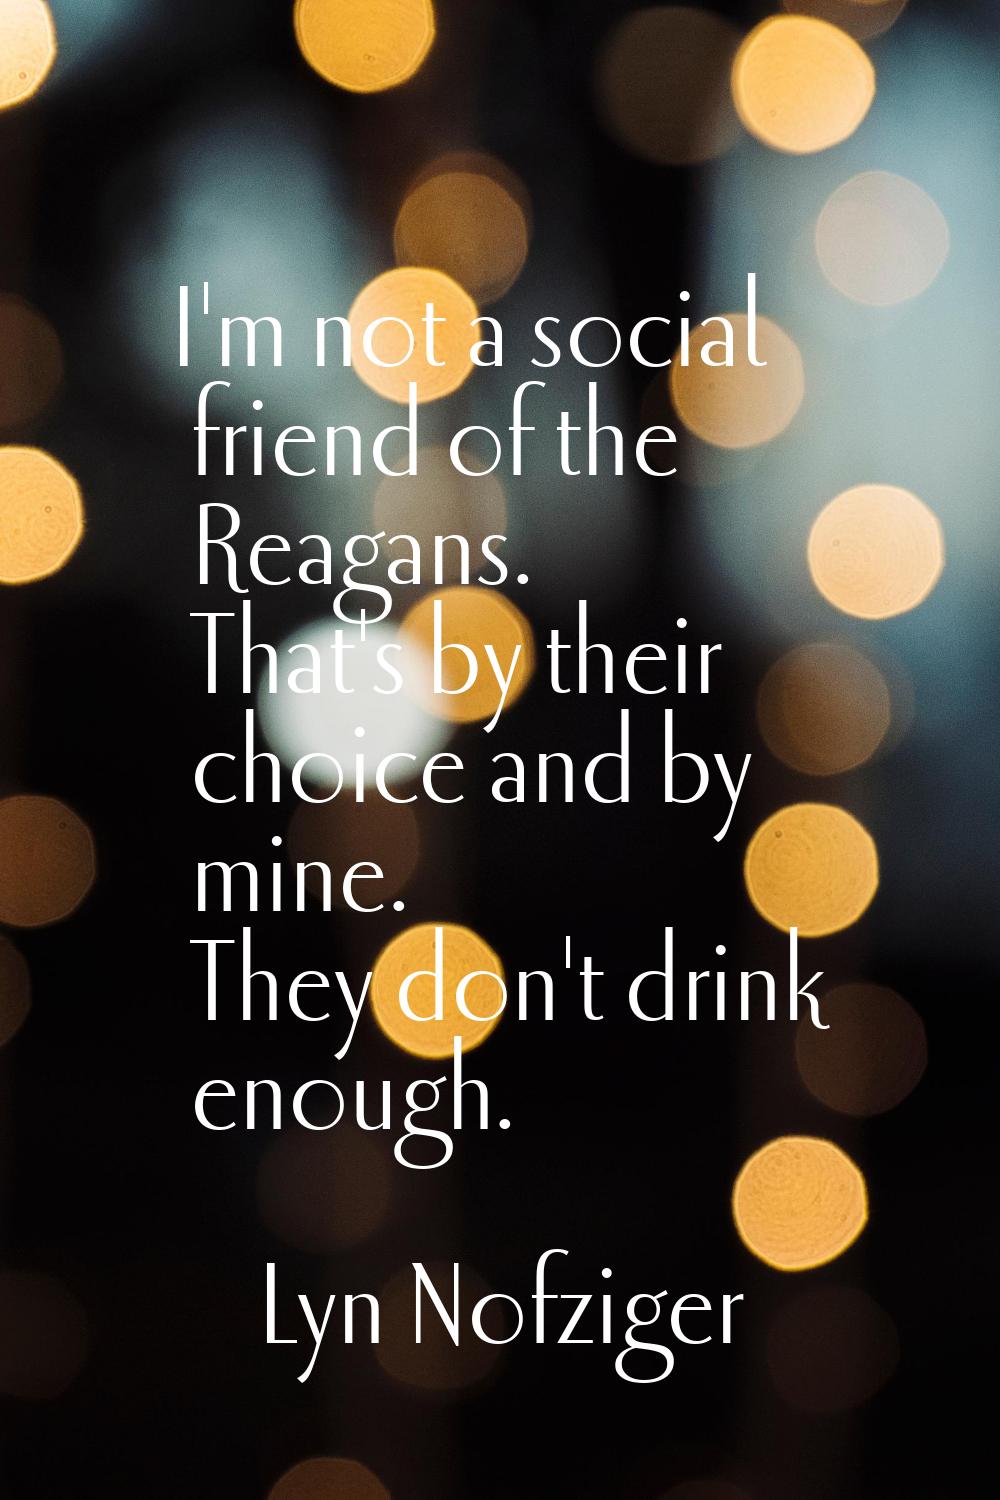 I'm not a social friend of the Reagans. That's by their choice and by mine. They don't drink enough